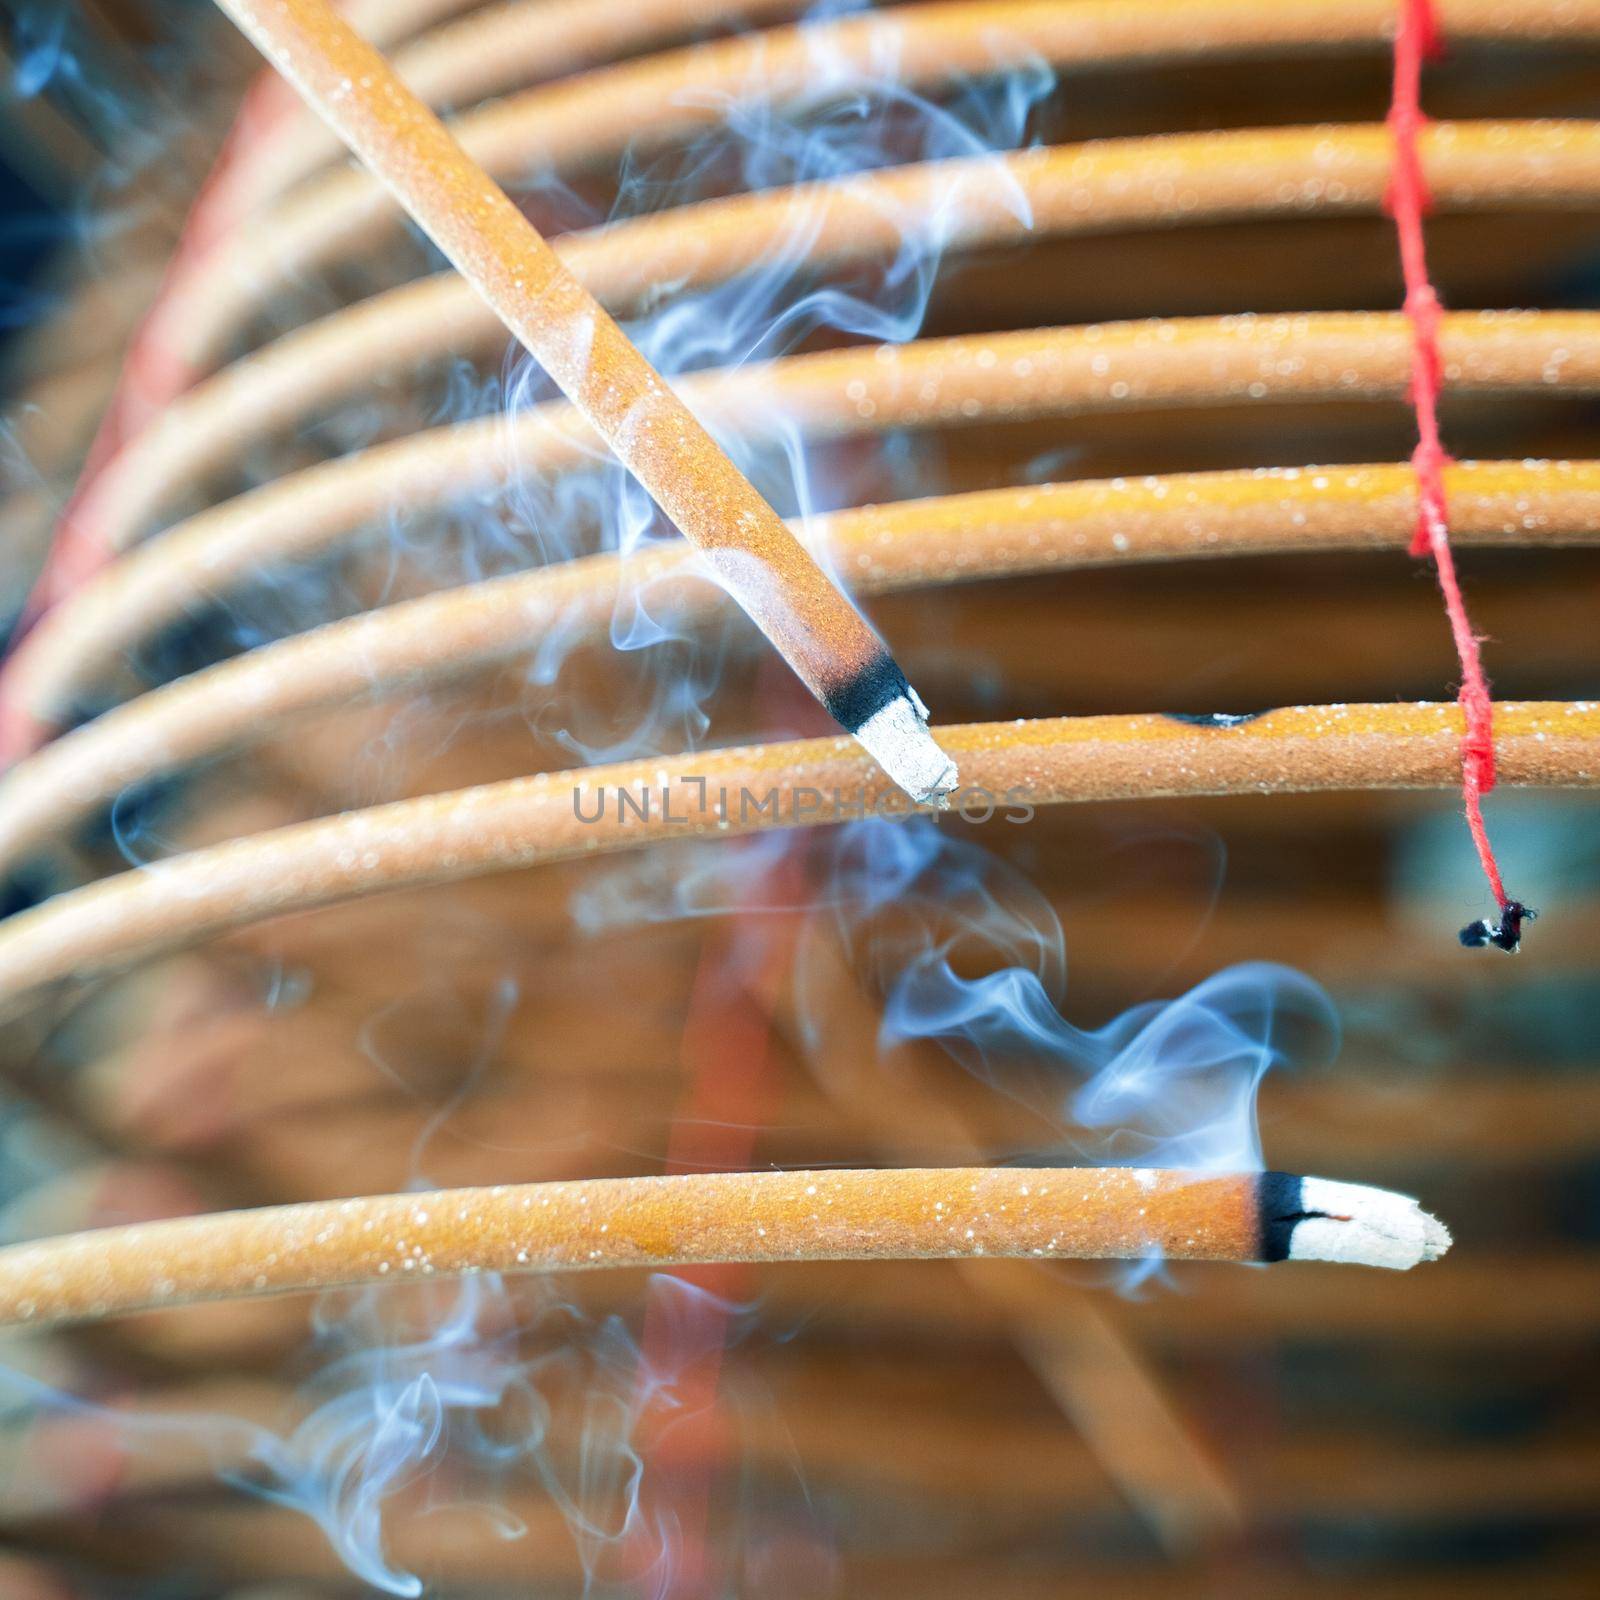 Burned coil swirl incense in Macau (Macao) temple,traditional Chinese cultural customs to worship god,close up,lifestyle.